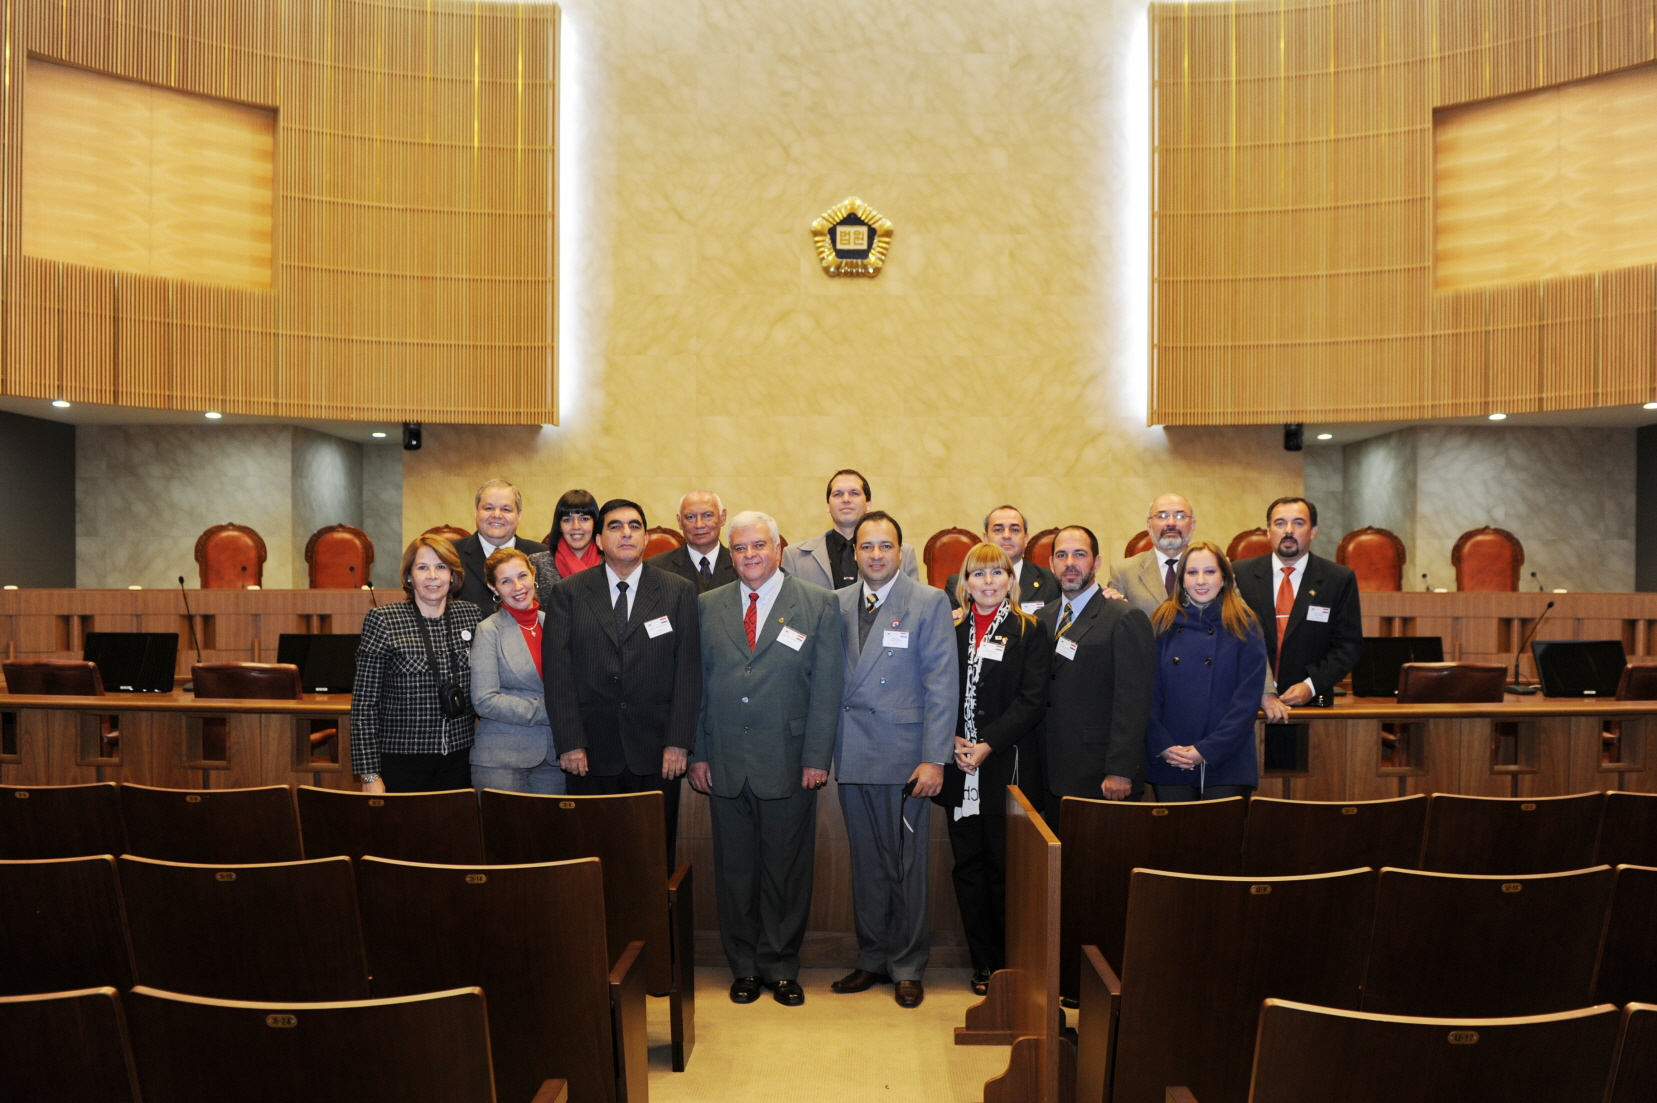 [04_05_11]Senior judges and Court officials from Paraguay completed Judicial Training Program in Korea